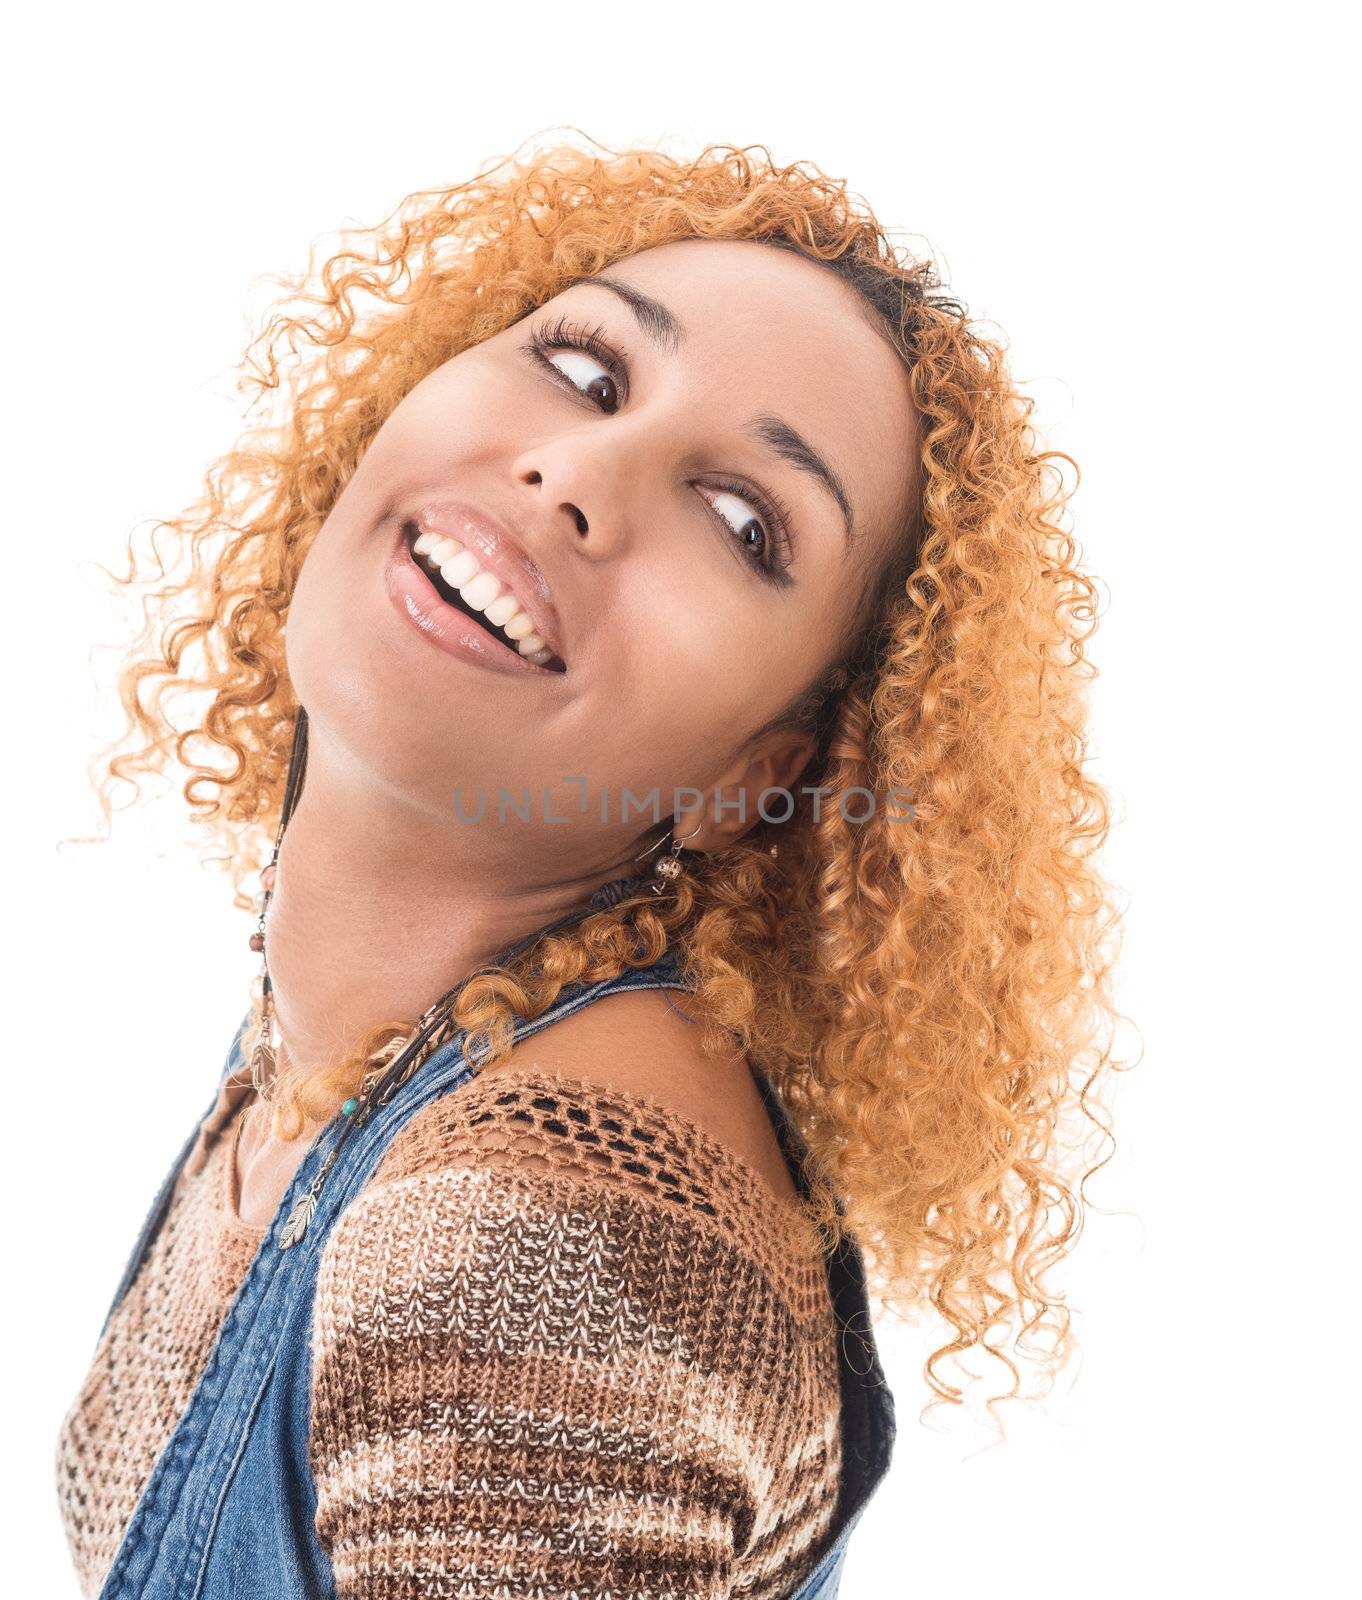 Portrait of attractive girl with curly golden hair